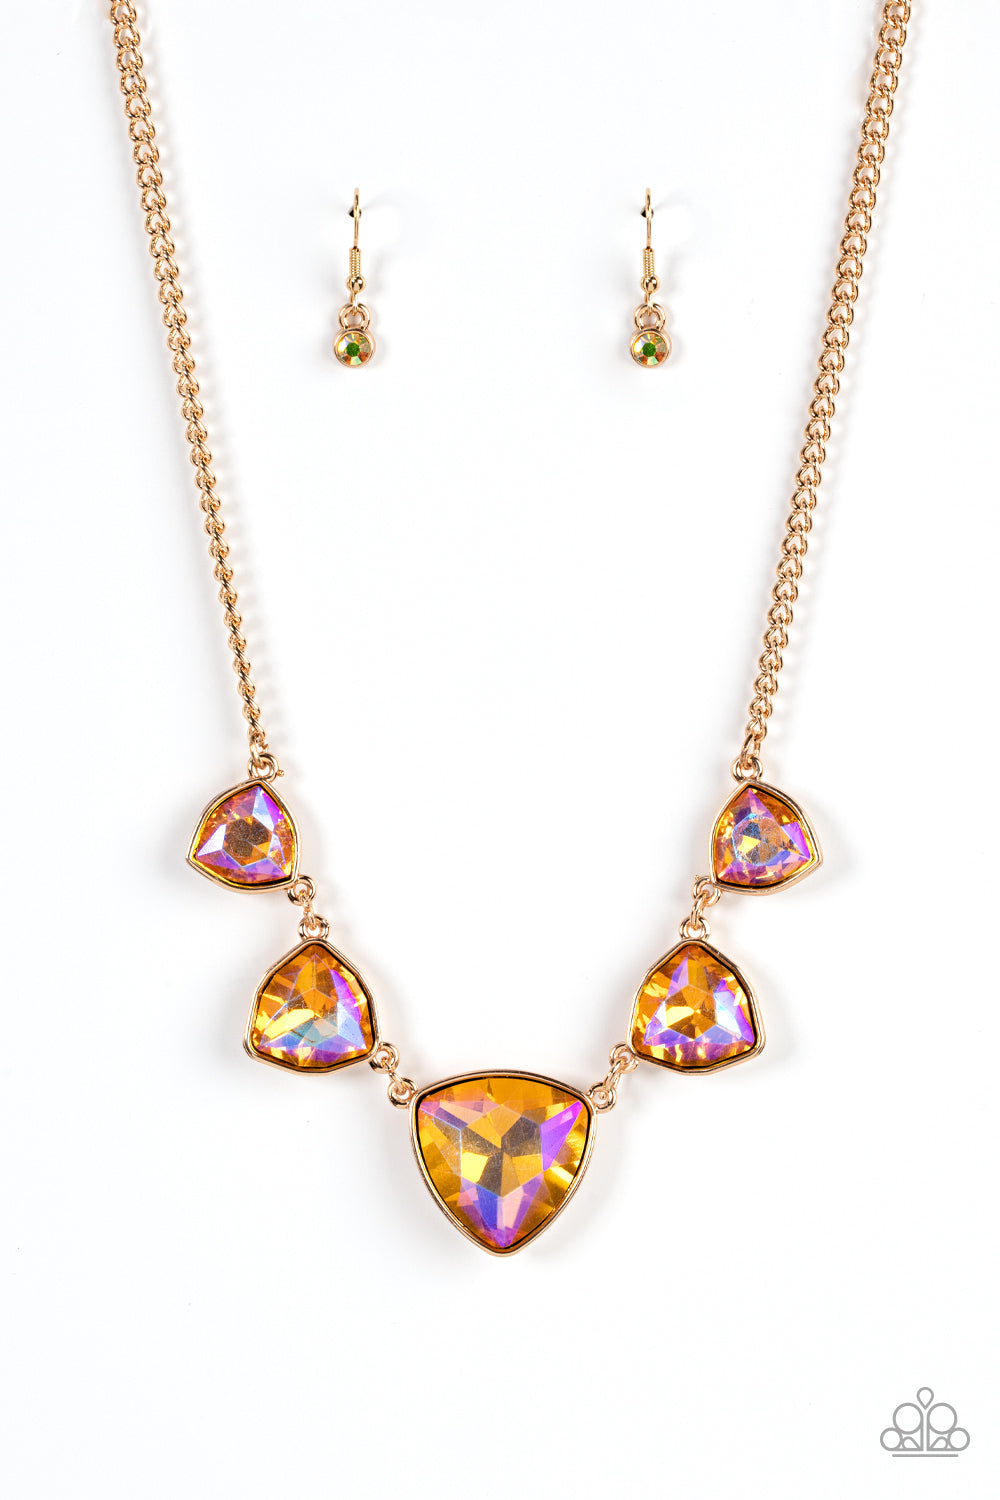 Paparazzi Cosmic Constellations - Gold Gem Necklaces encased in sleek gold fittings, an oversized collection of UV geometric gems gradually increase in size as they link below the collar for a golden statement. Features an adjustable clasp closure.  Sold as one individual necklace. Includes one pair of matching earrings.